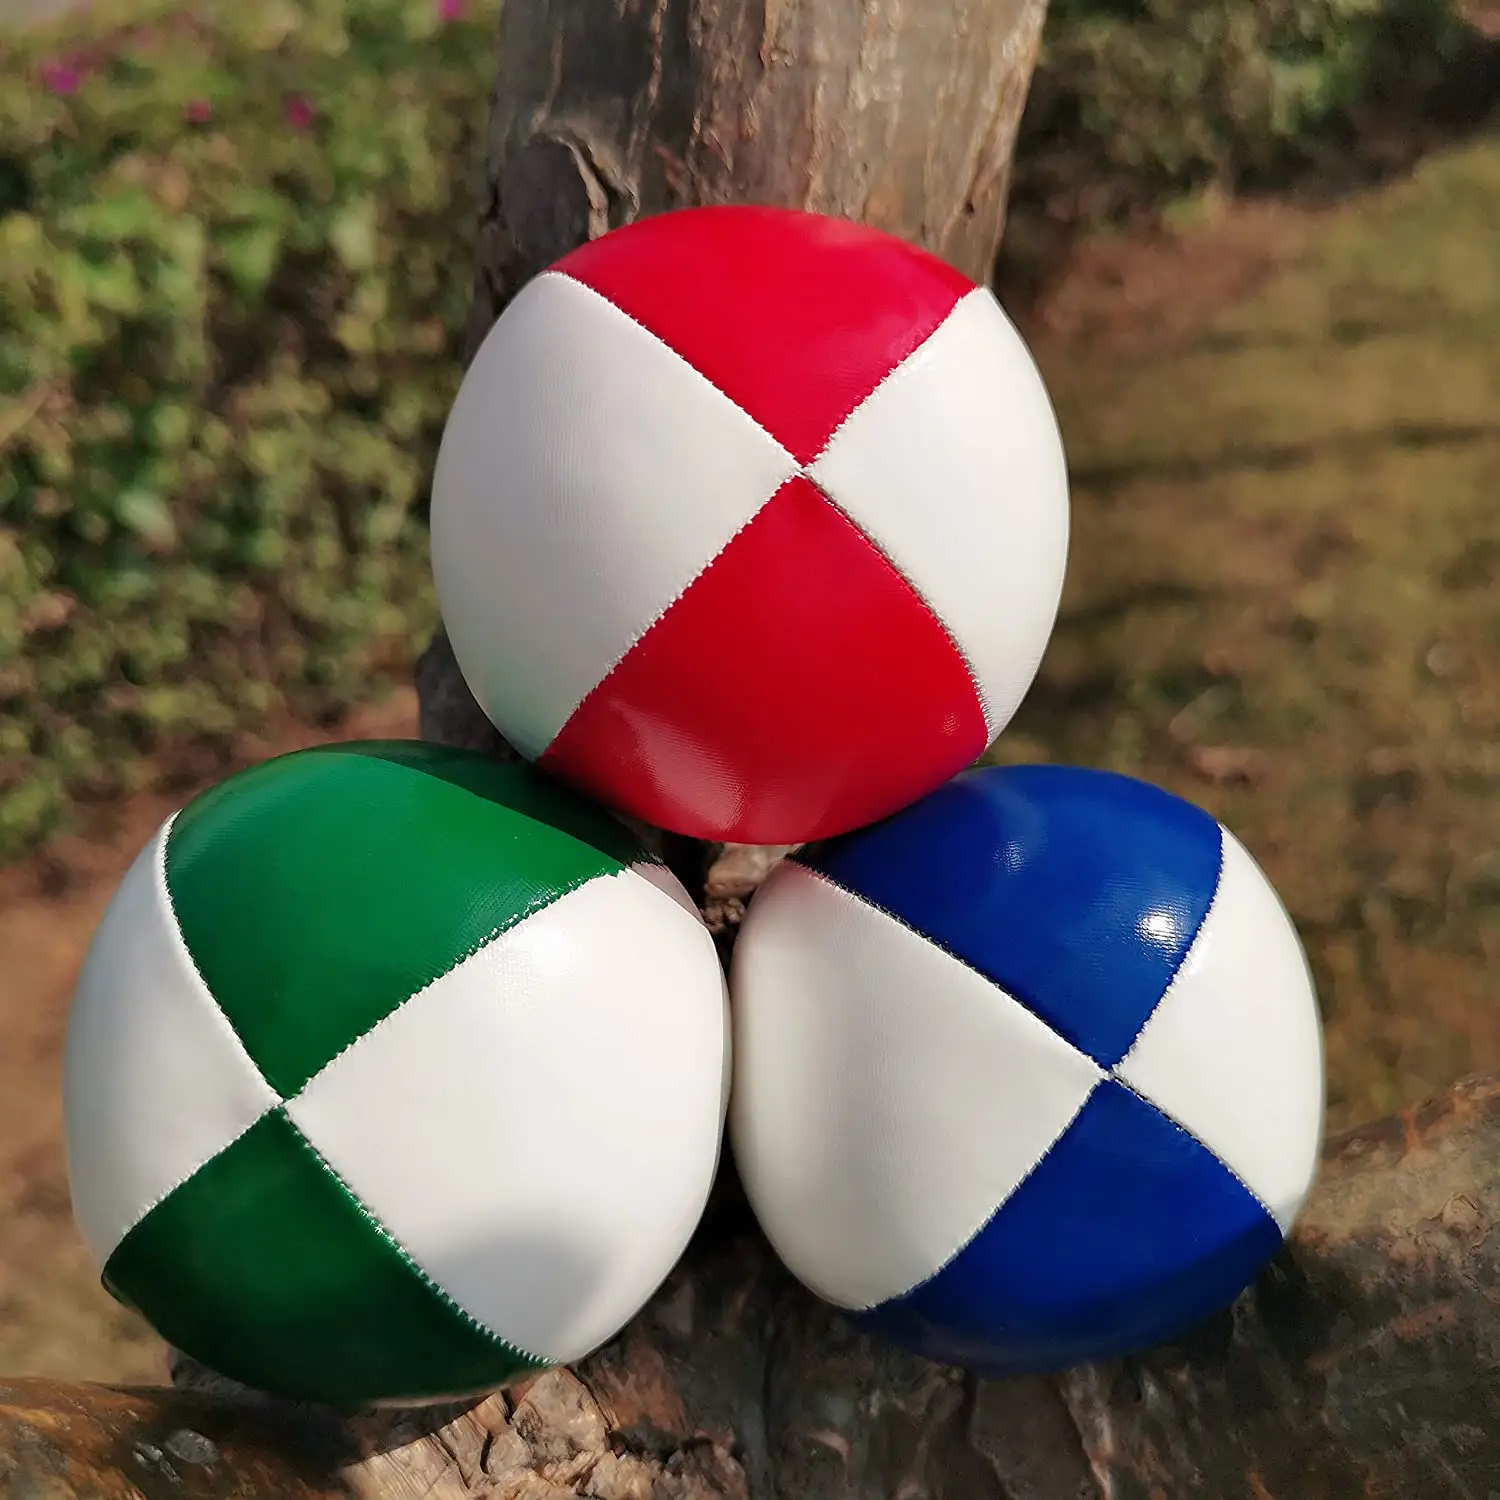 High Quality Professional Pu Leather Juggling Ball Soccer Picture Golden Rgb Juggling Balls